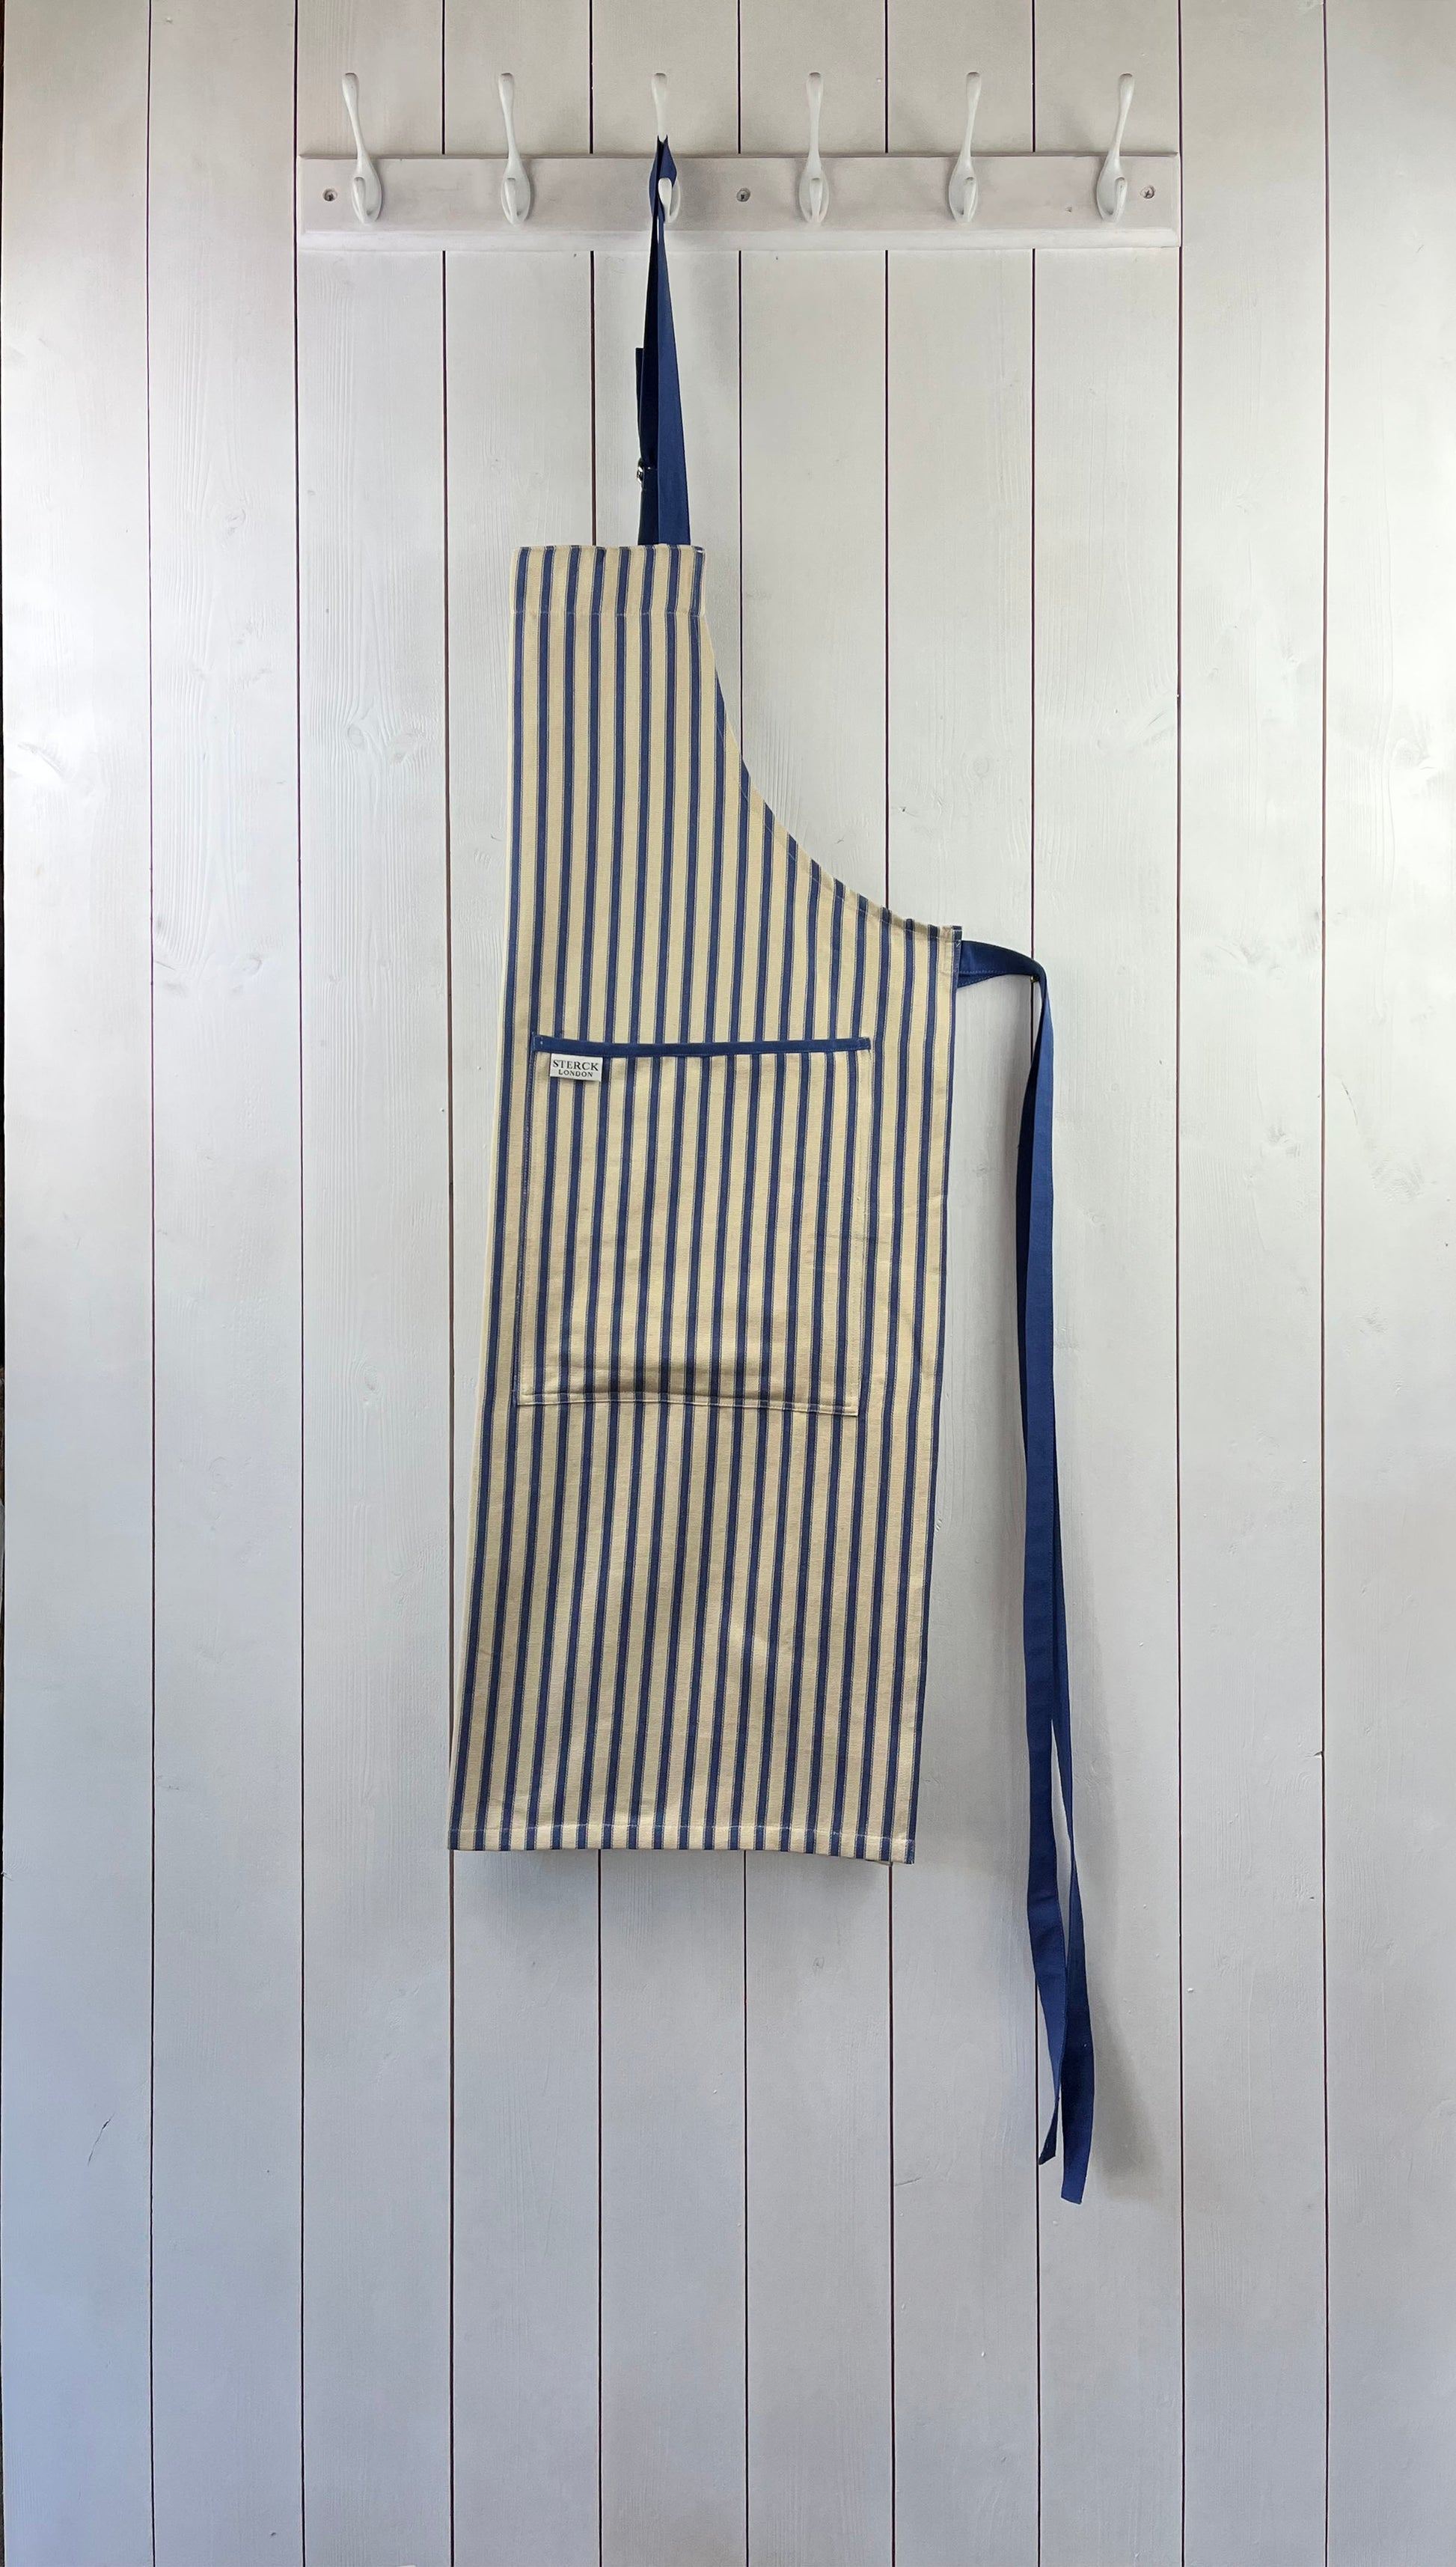 A classic cream and blue striped cotton apron with double front pockets, blue ties and adjustable neck straps. Sterck & Co.